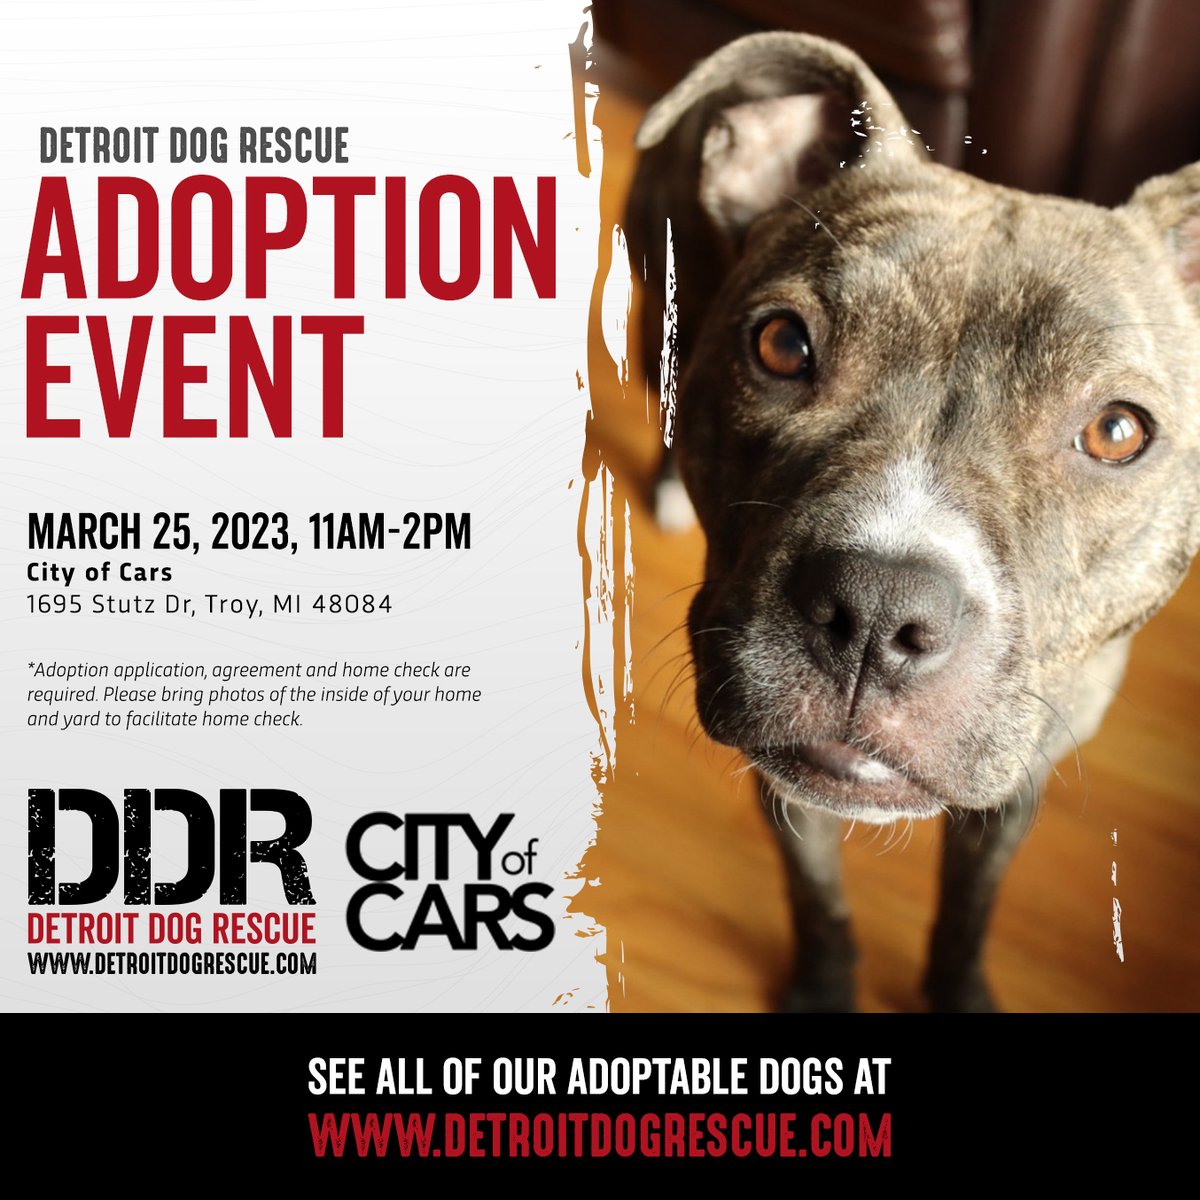 Looking to expand your family? Come meet our adoptable dogs & puppies Sat, 3/25 at City of Cars from 11am-2pm! See all of our adoptable dogs and find more information at DetroitDogRescue.com #DetroitDogRescue #Rescue #Foster #Adopt #AdoptionEvent #Detroit